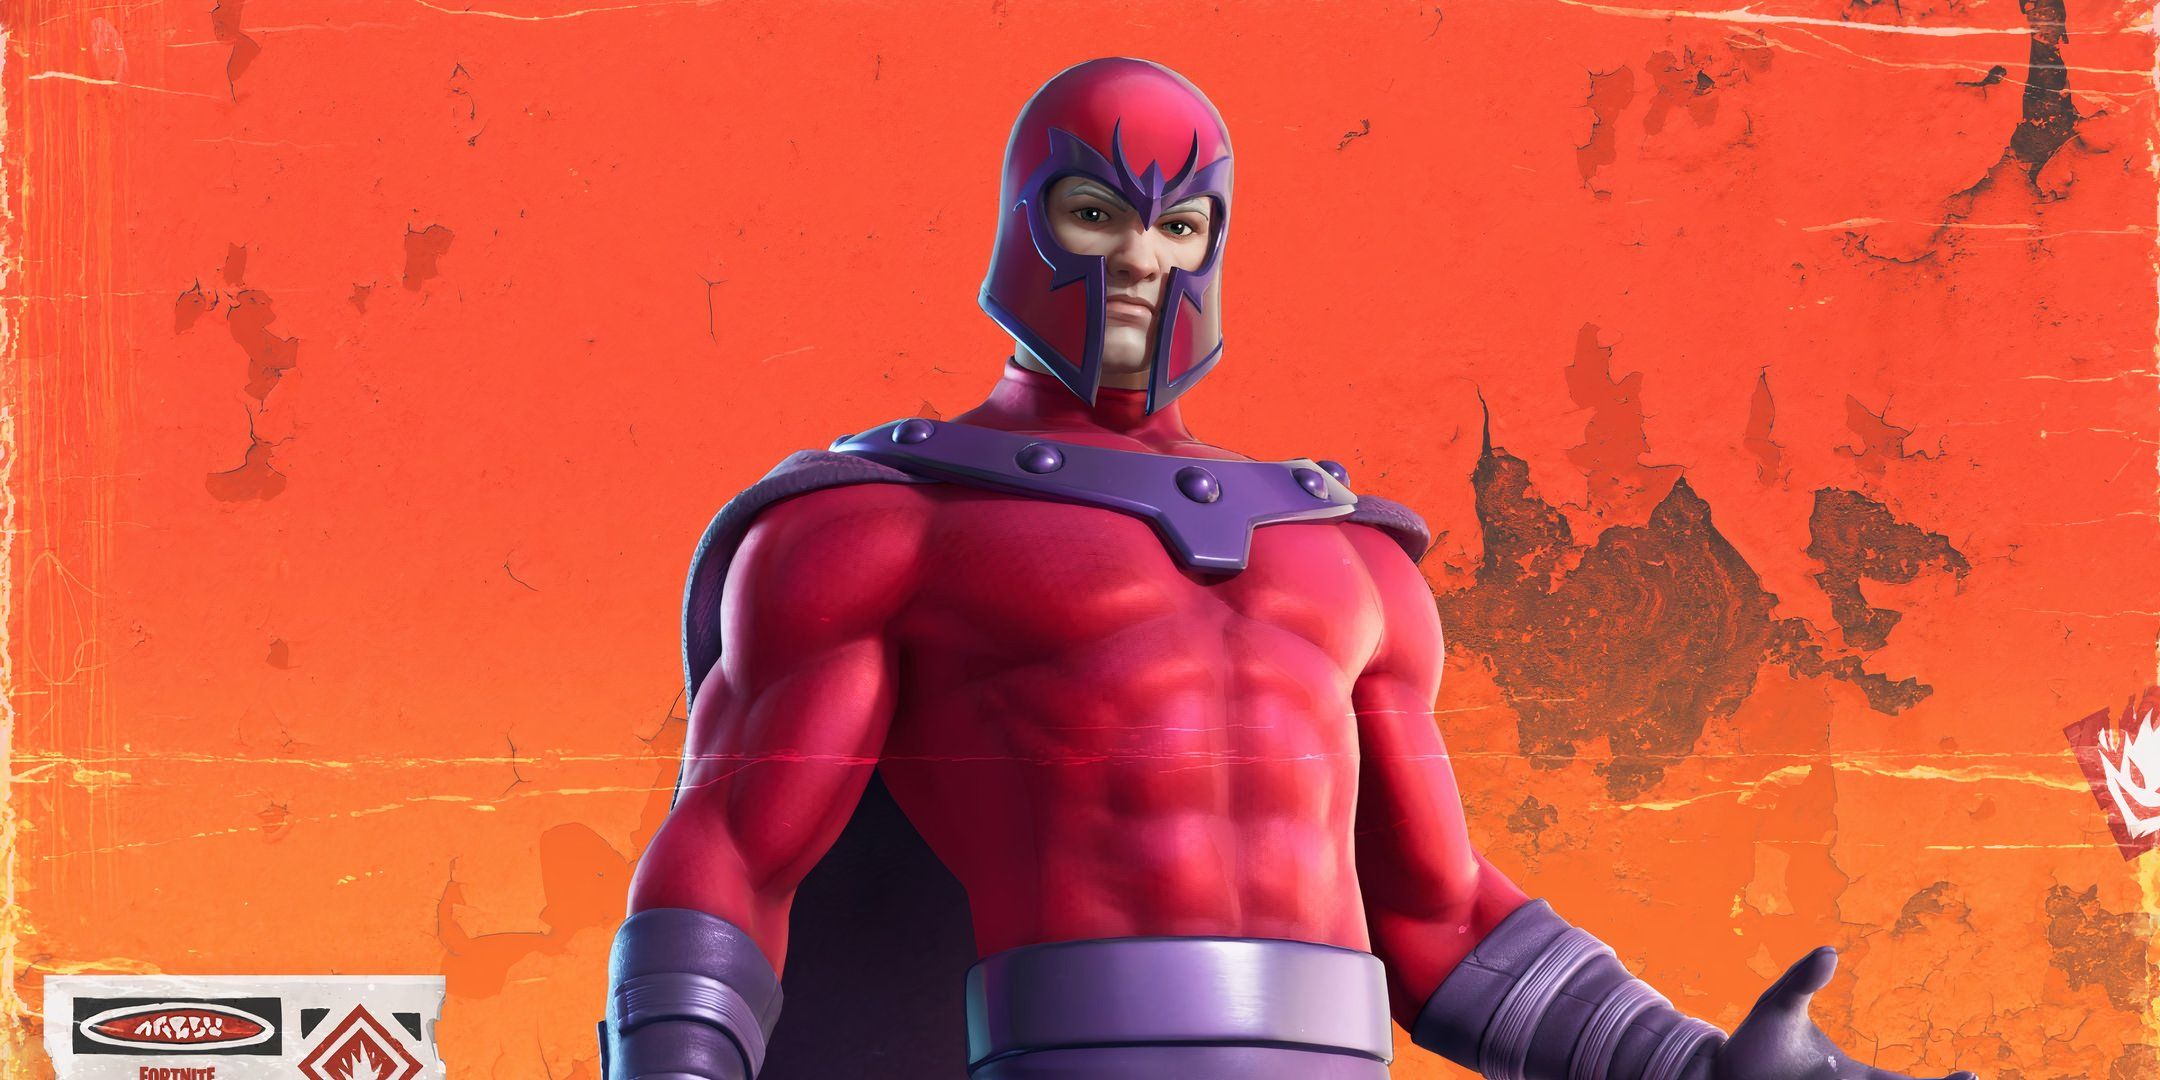 Magneto's classic outfit in Fortnite.